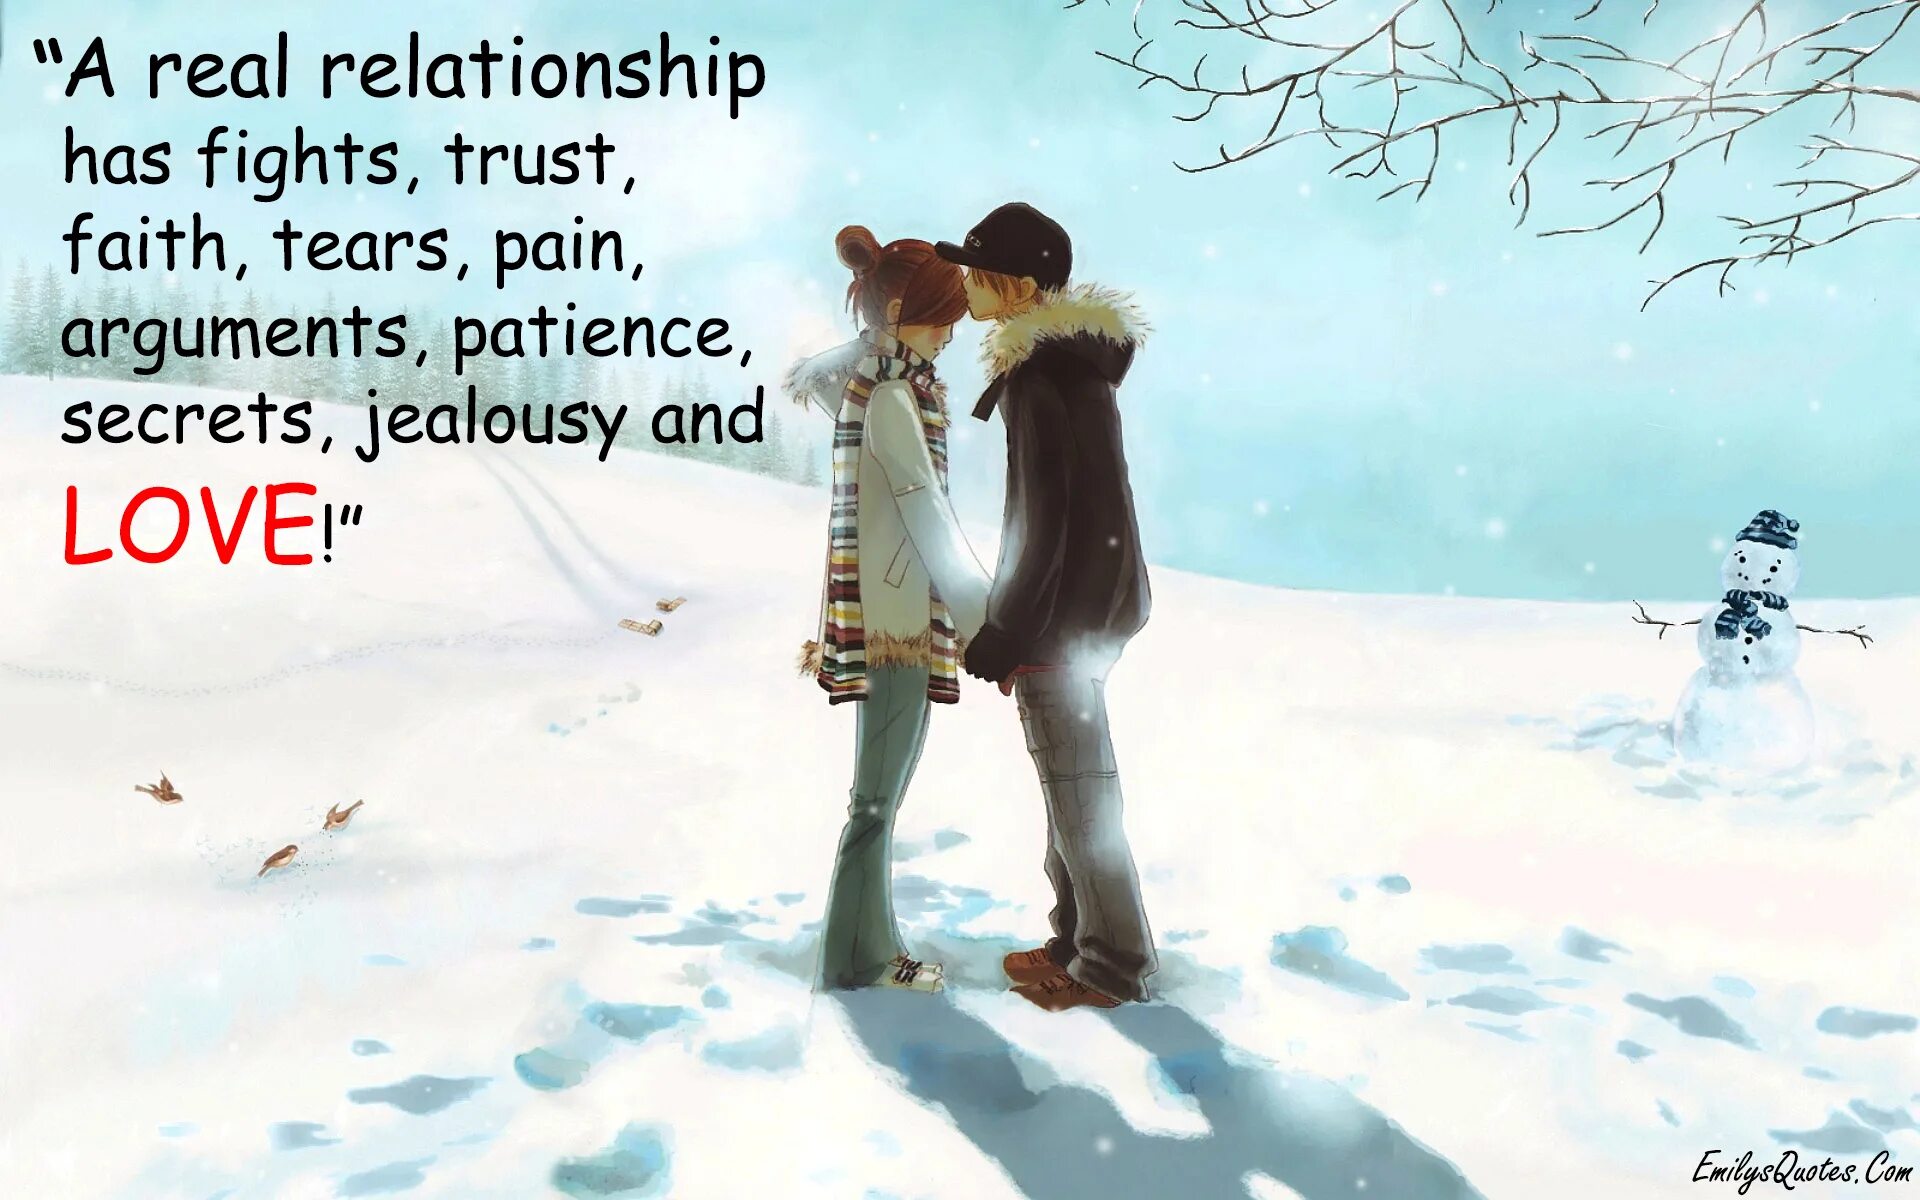 Лове ловер. Love and Trust. Quotes about Love in English. Trust relationship. Love Trust Faith.